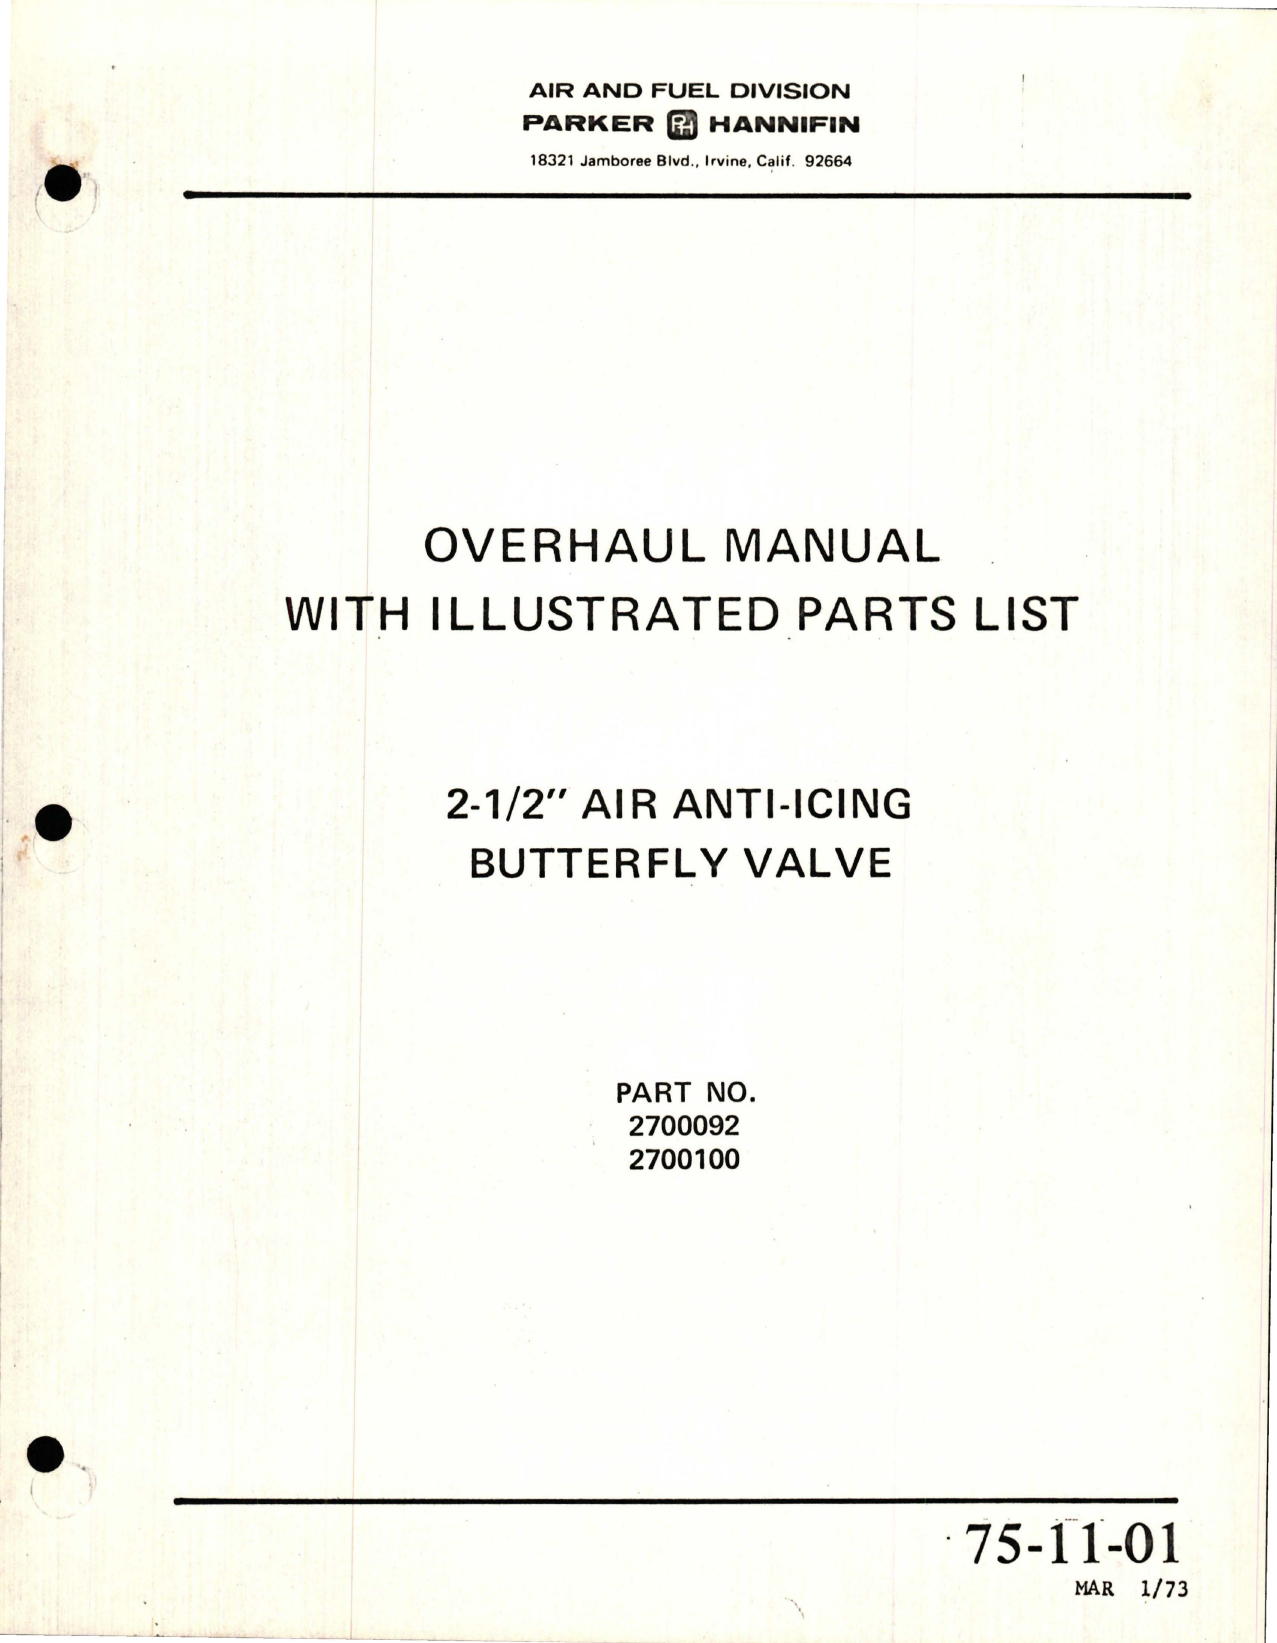 Sample page 1 from AirCorps Library document: Overhaul with Illustrated Parts List for Anti-Icing Butterfly Valve - 2 1/2 inch - Parts 2700092 and 2700100